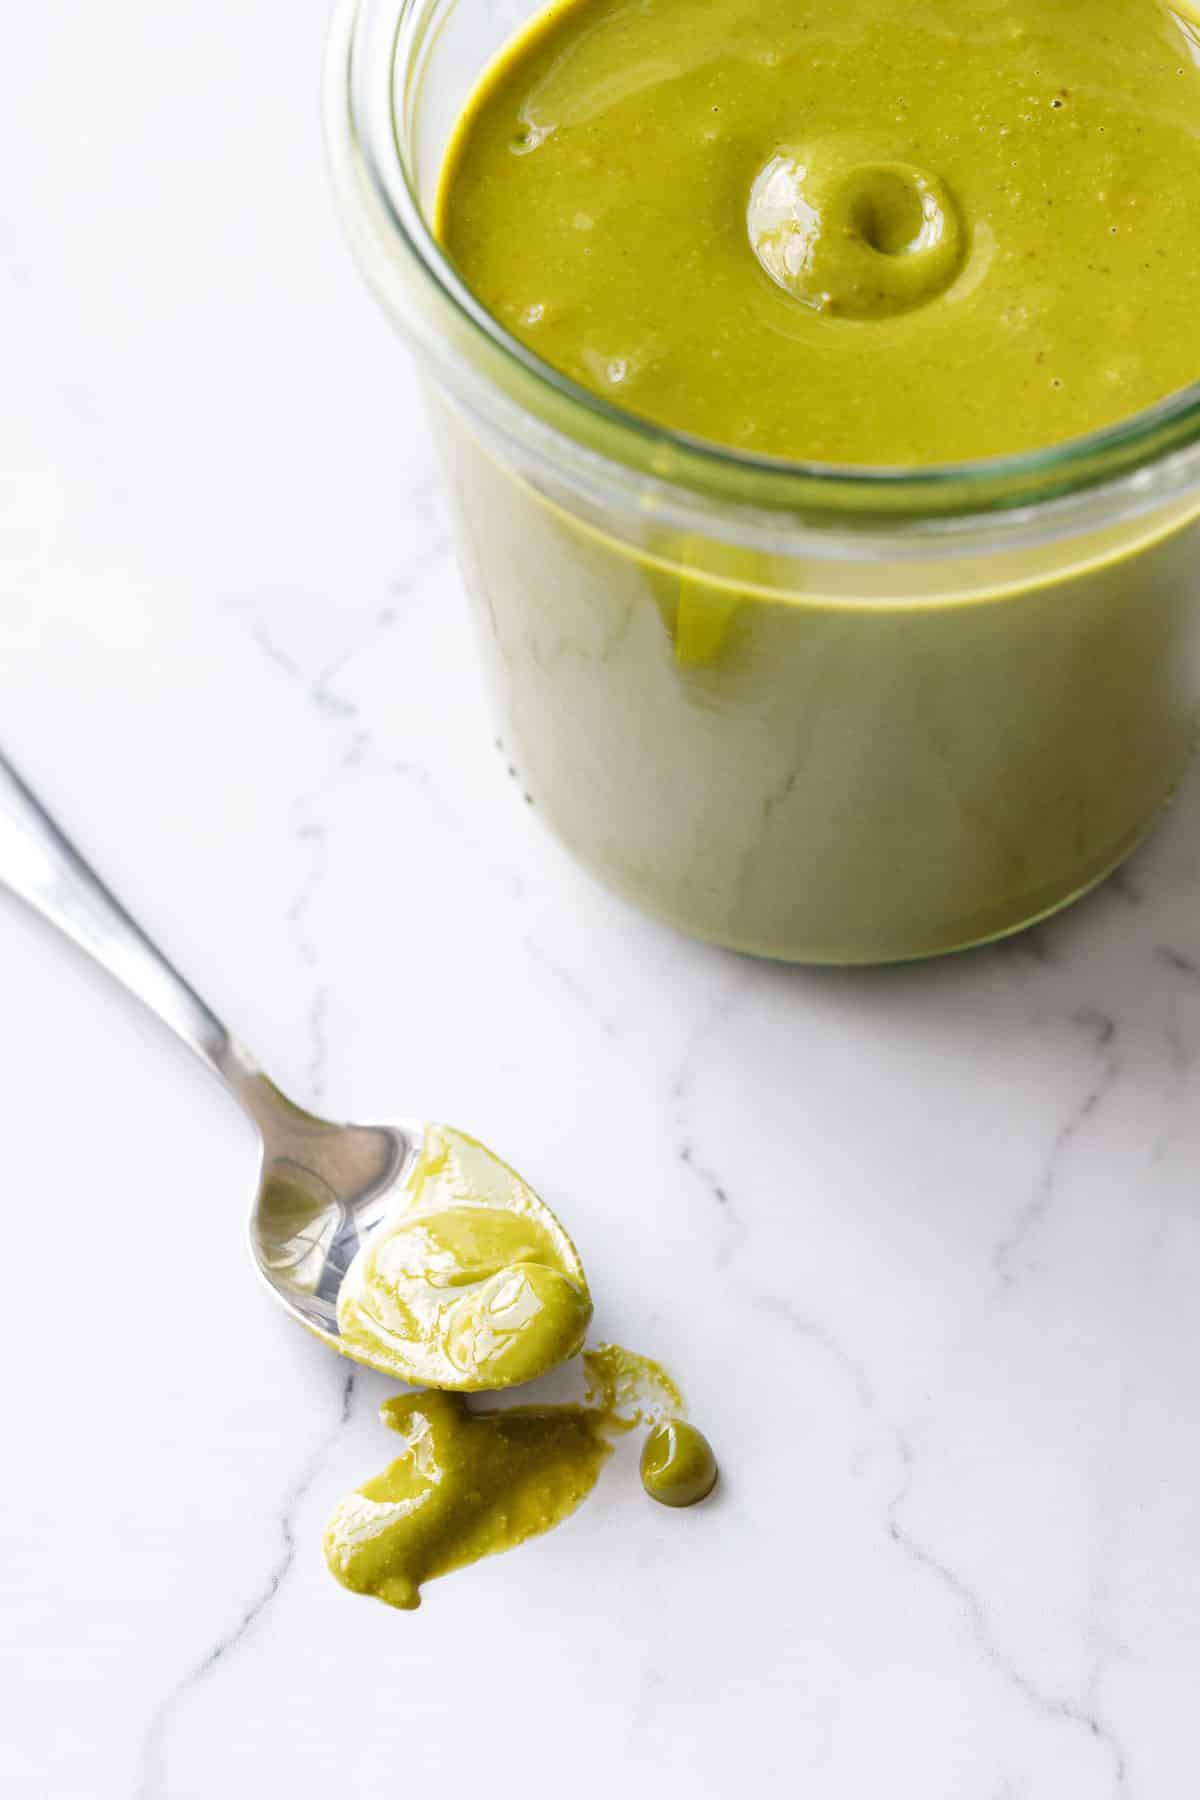 Spoonful of green homemade pistachio butter oozing onto a white marble background, with a jar of pistachio butter beside it.